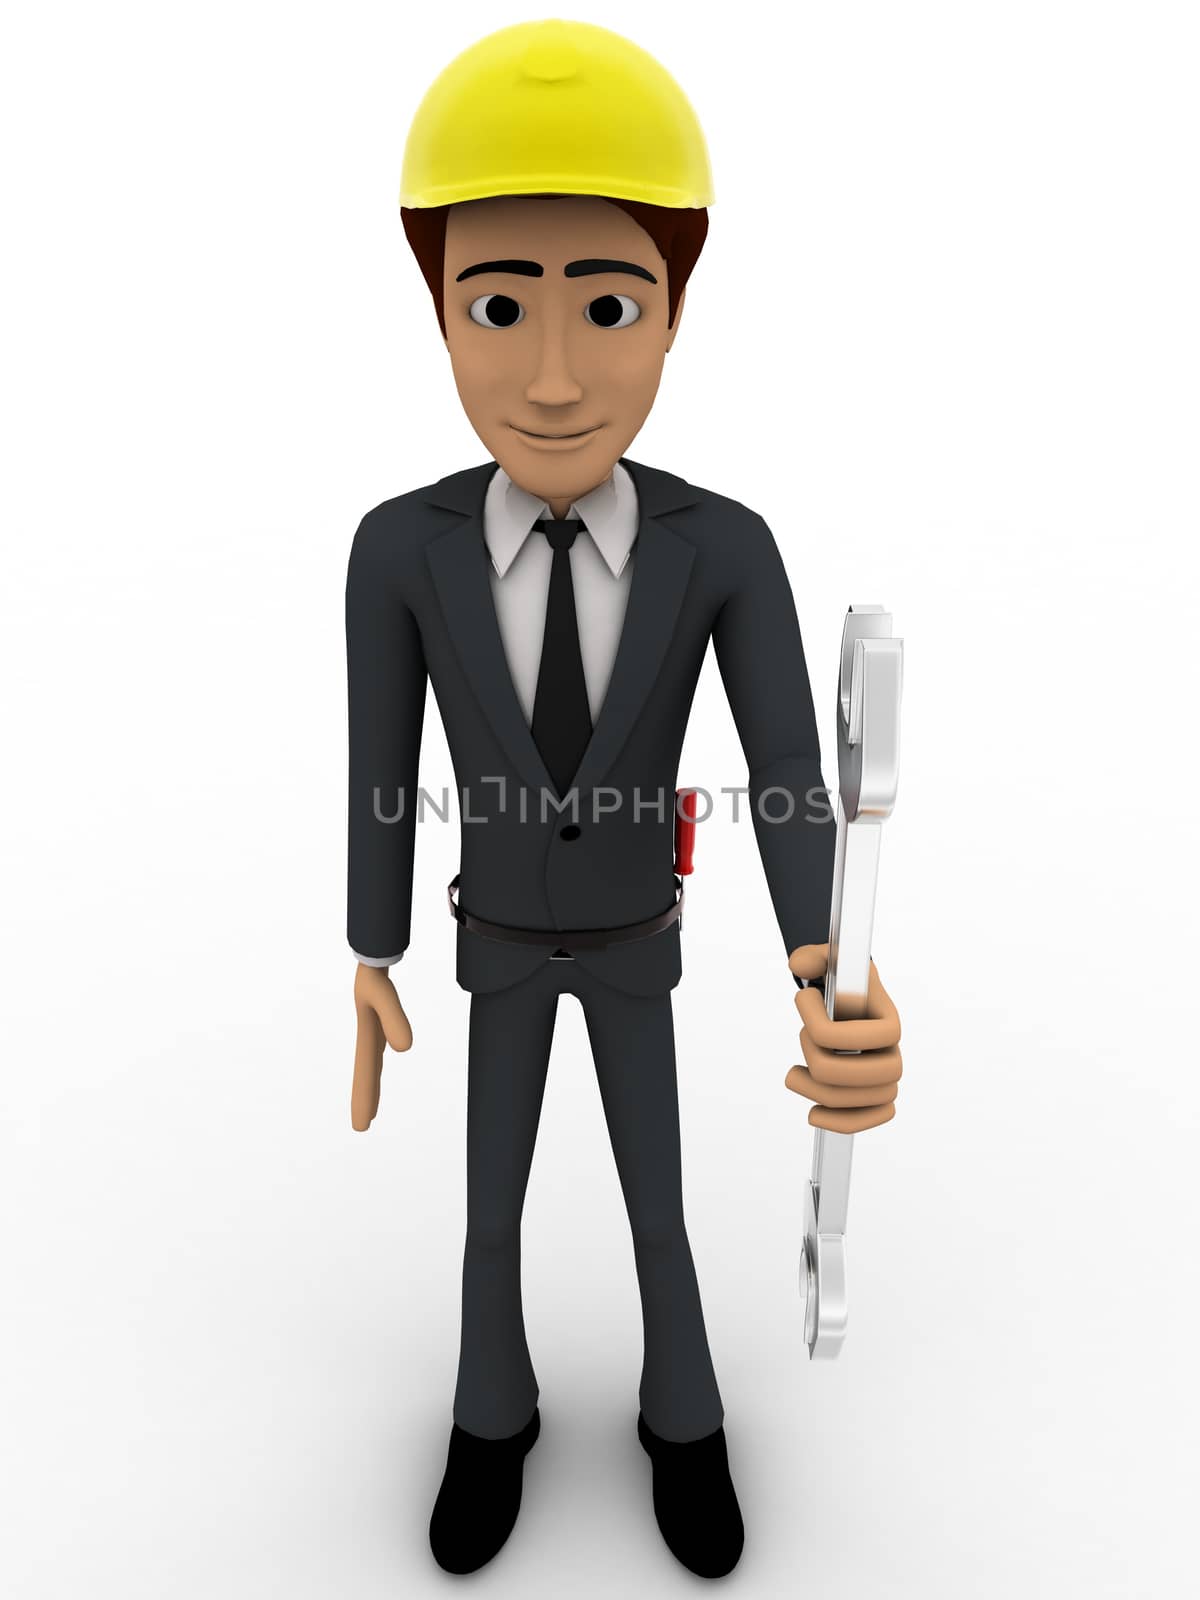 3d man standing with wrench in hand concept by touchmenithin@gmail.com